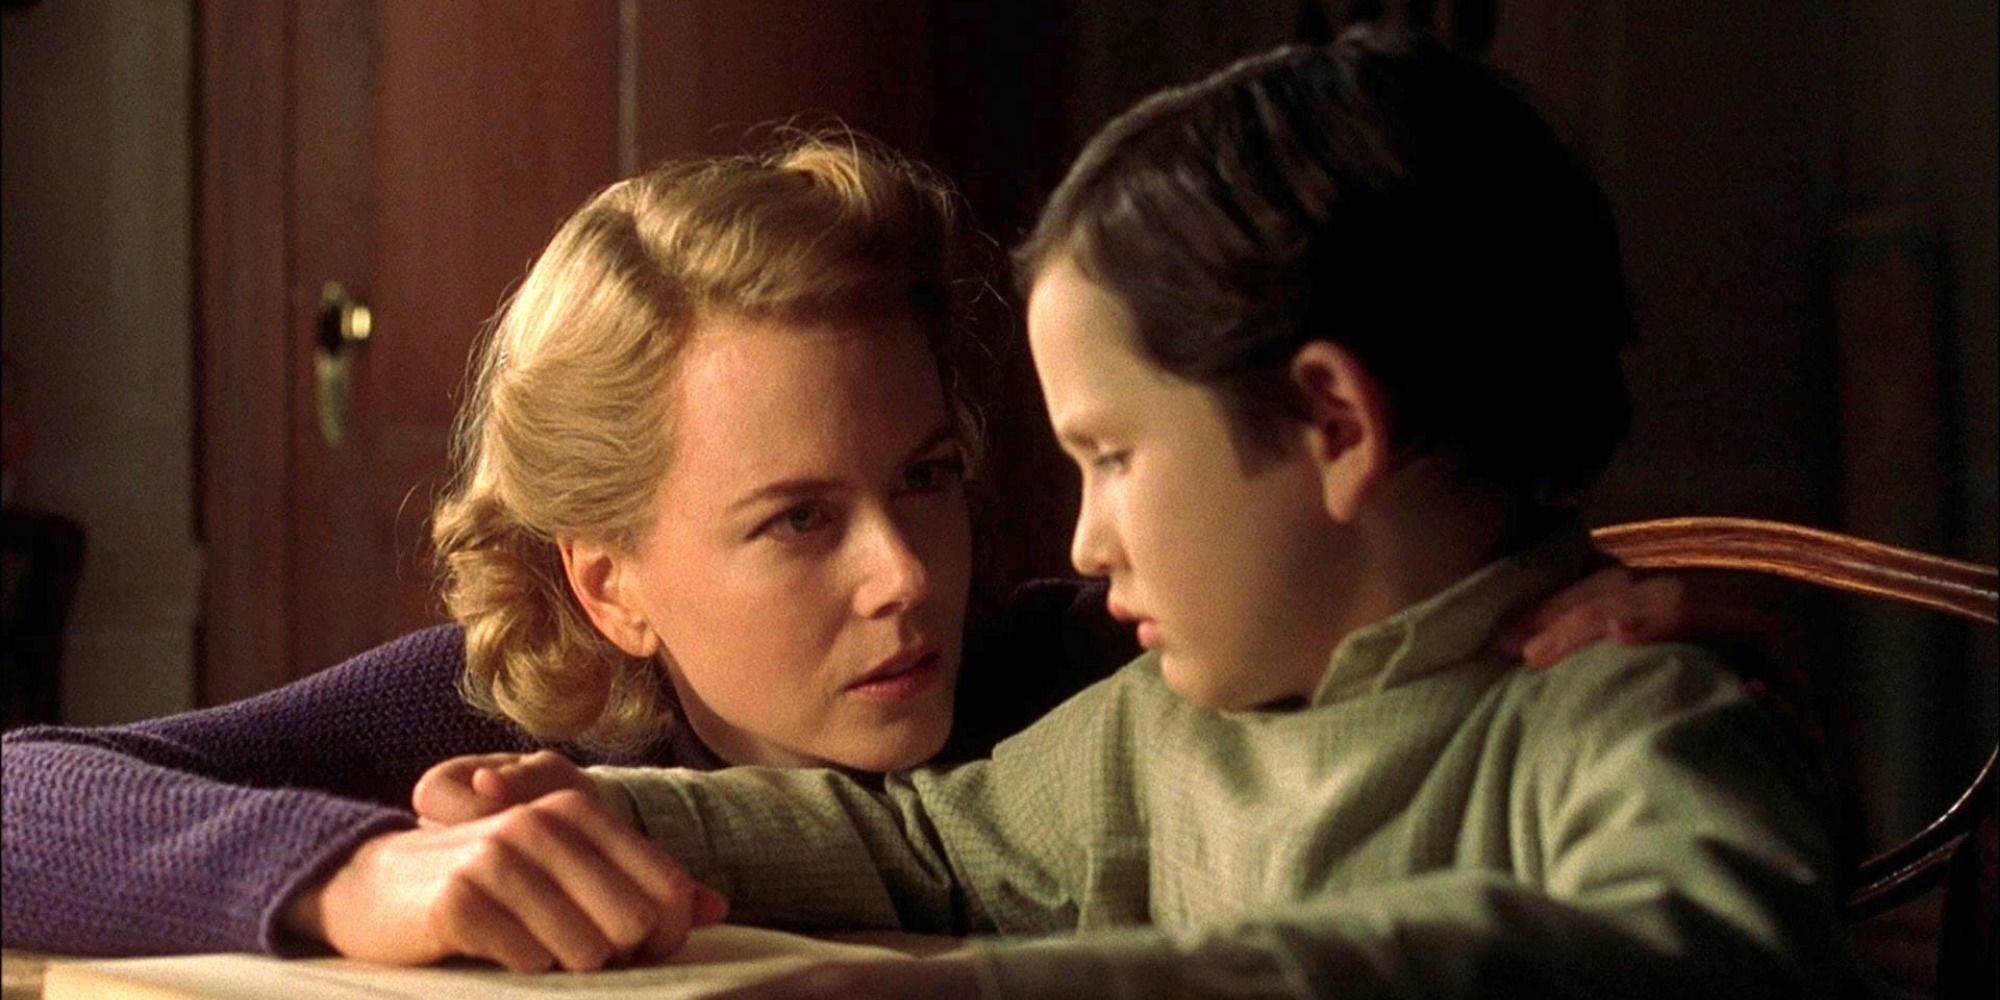 A screenshot of Grace Stewart confiding to her son in The Others